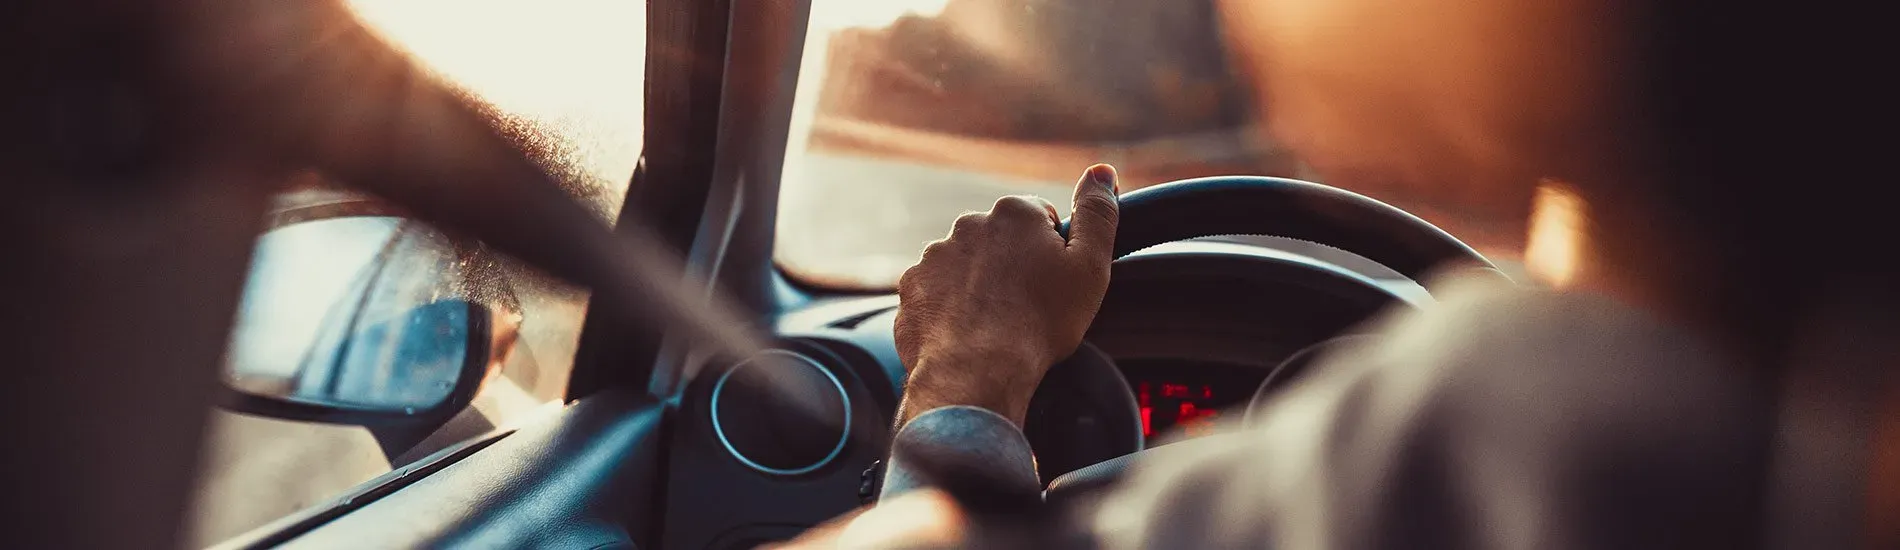 Person with hands on steering wheel driving a car in New Zealand